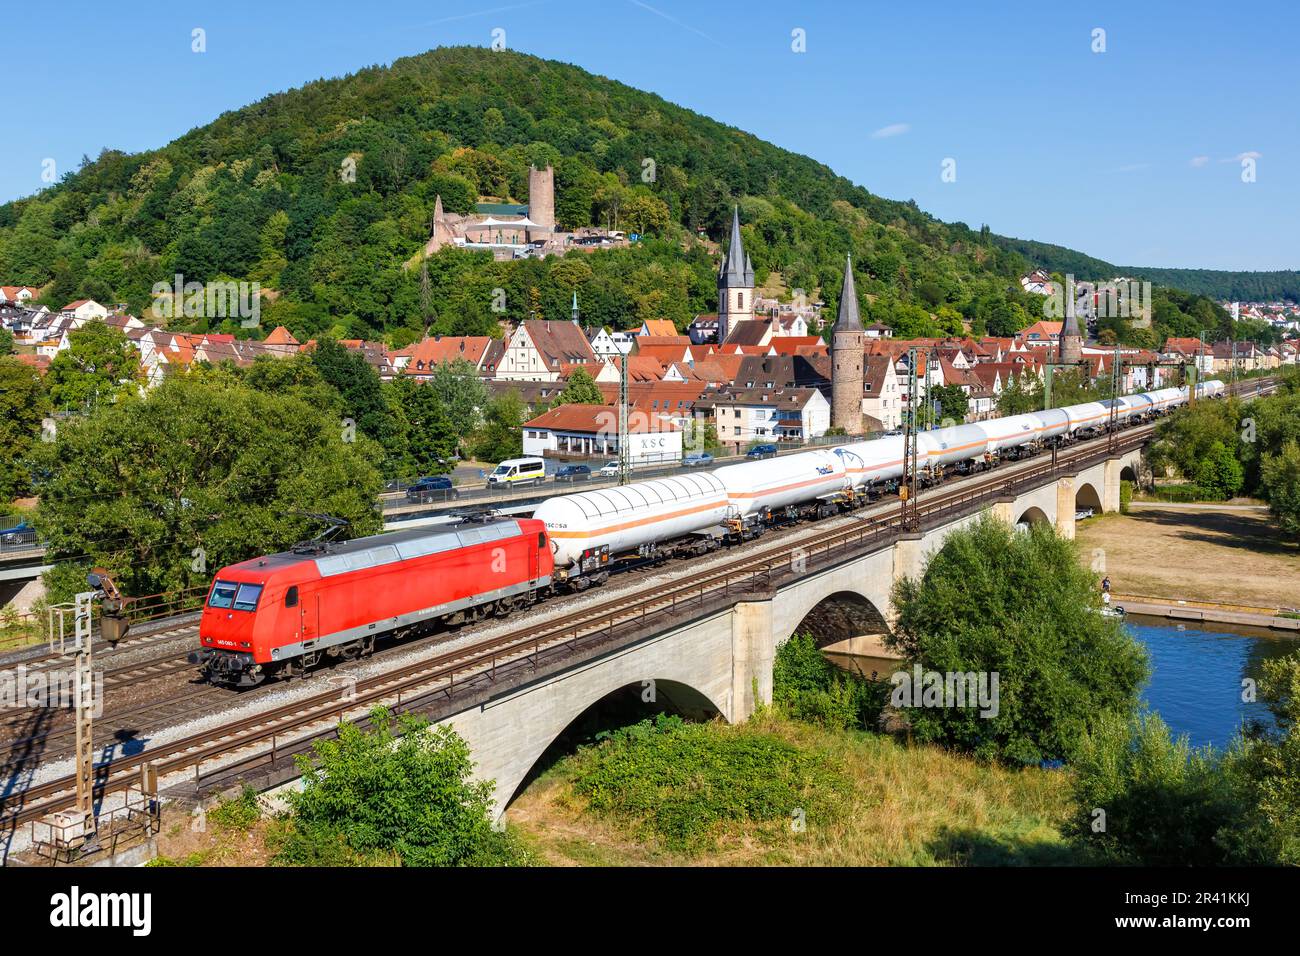 Freight train with tank car Cargo train in GemÃ¼nden am Main, Germany Stock Photo